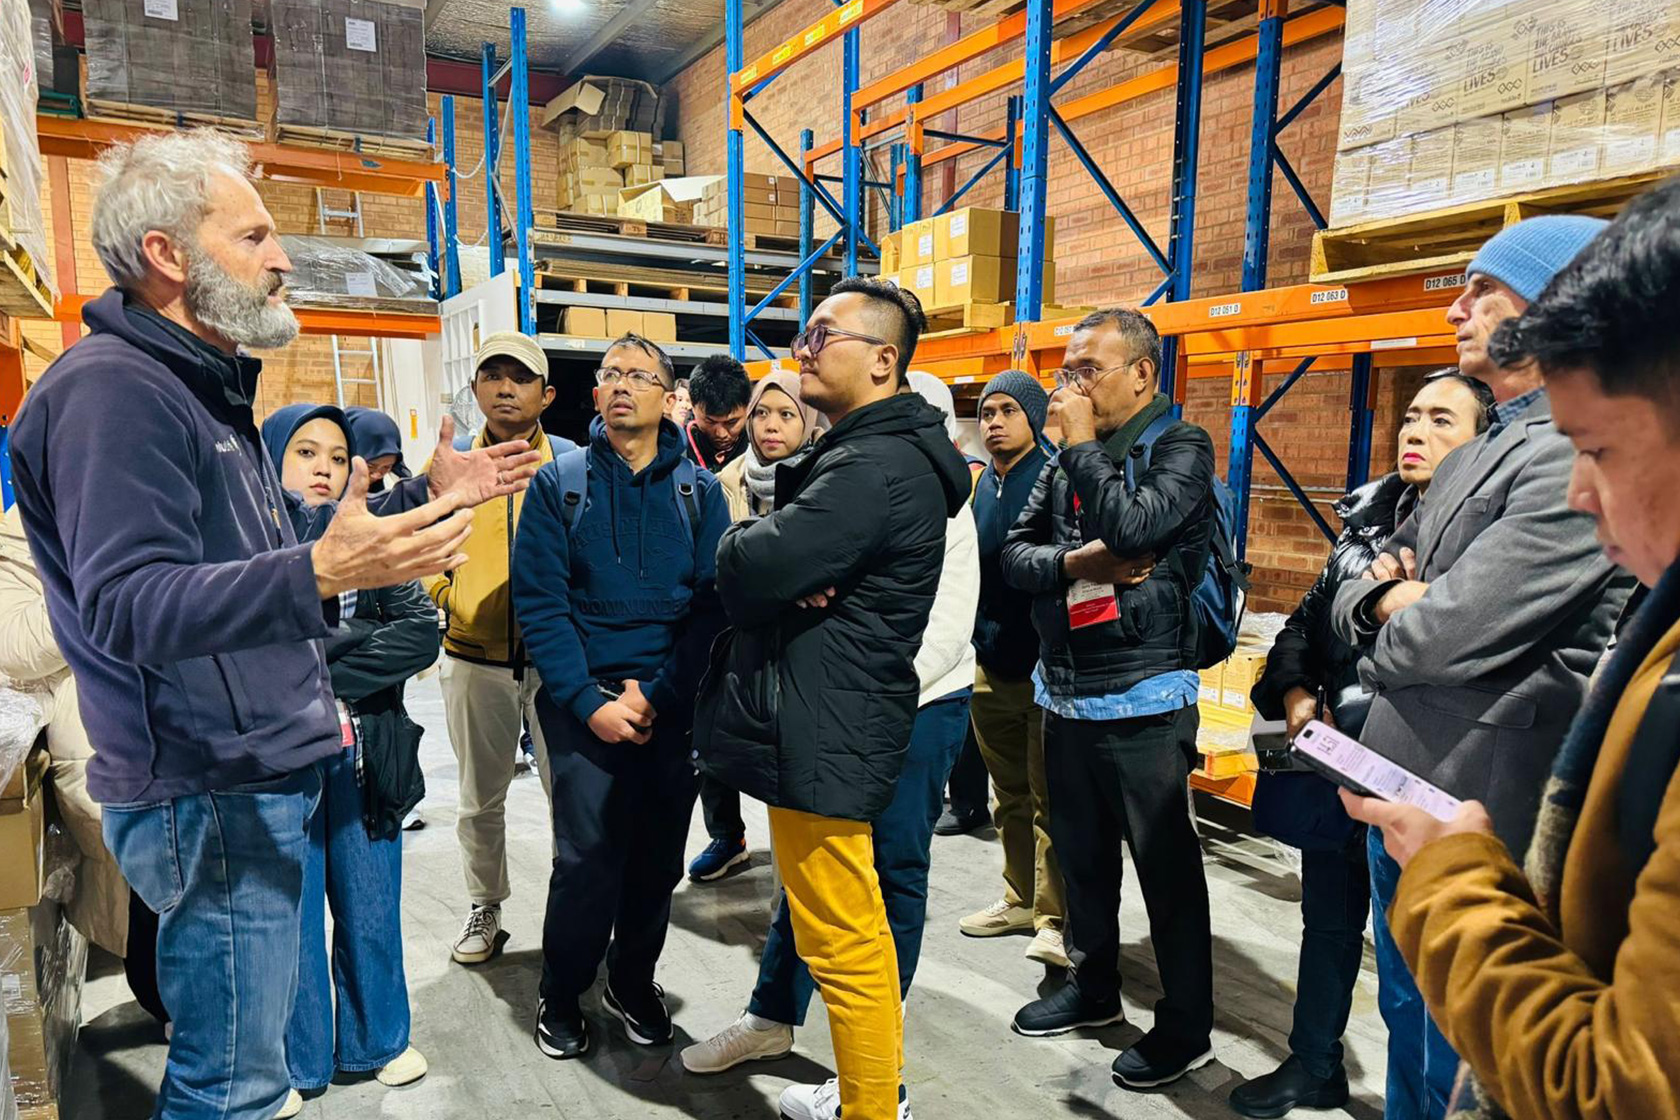 Short course participants interact with experts from Kokonut Pacific during an industrial visit.